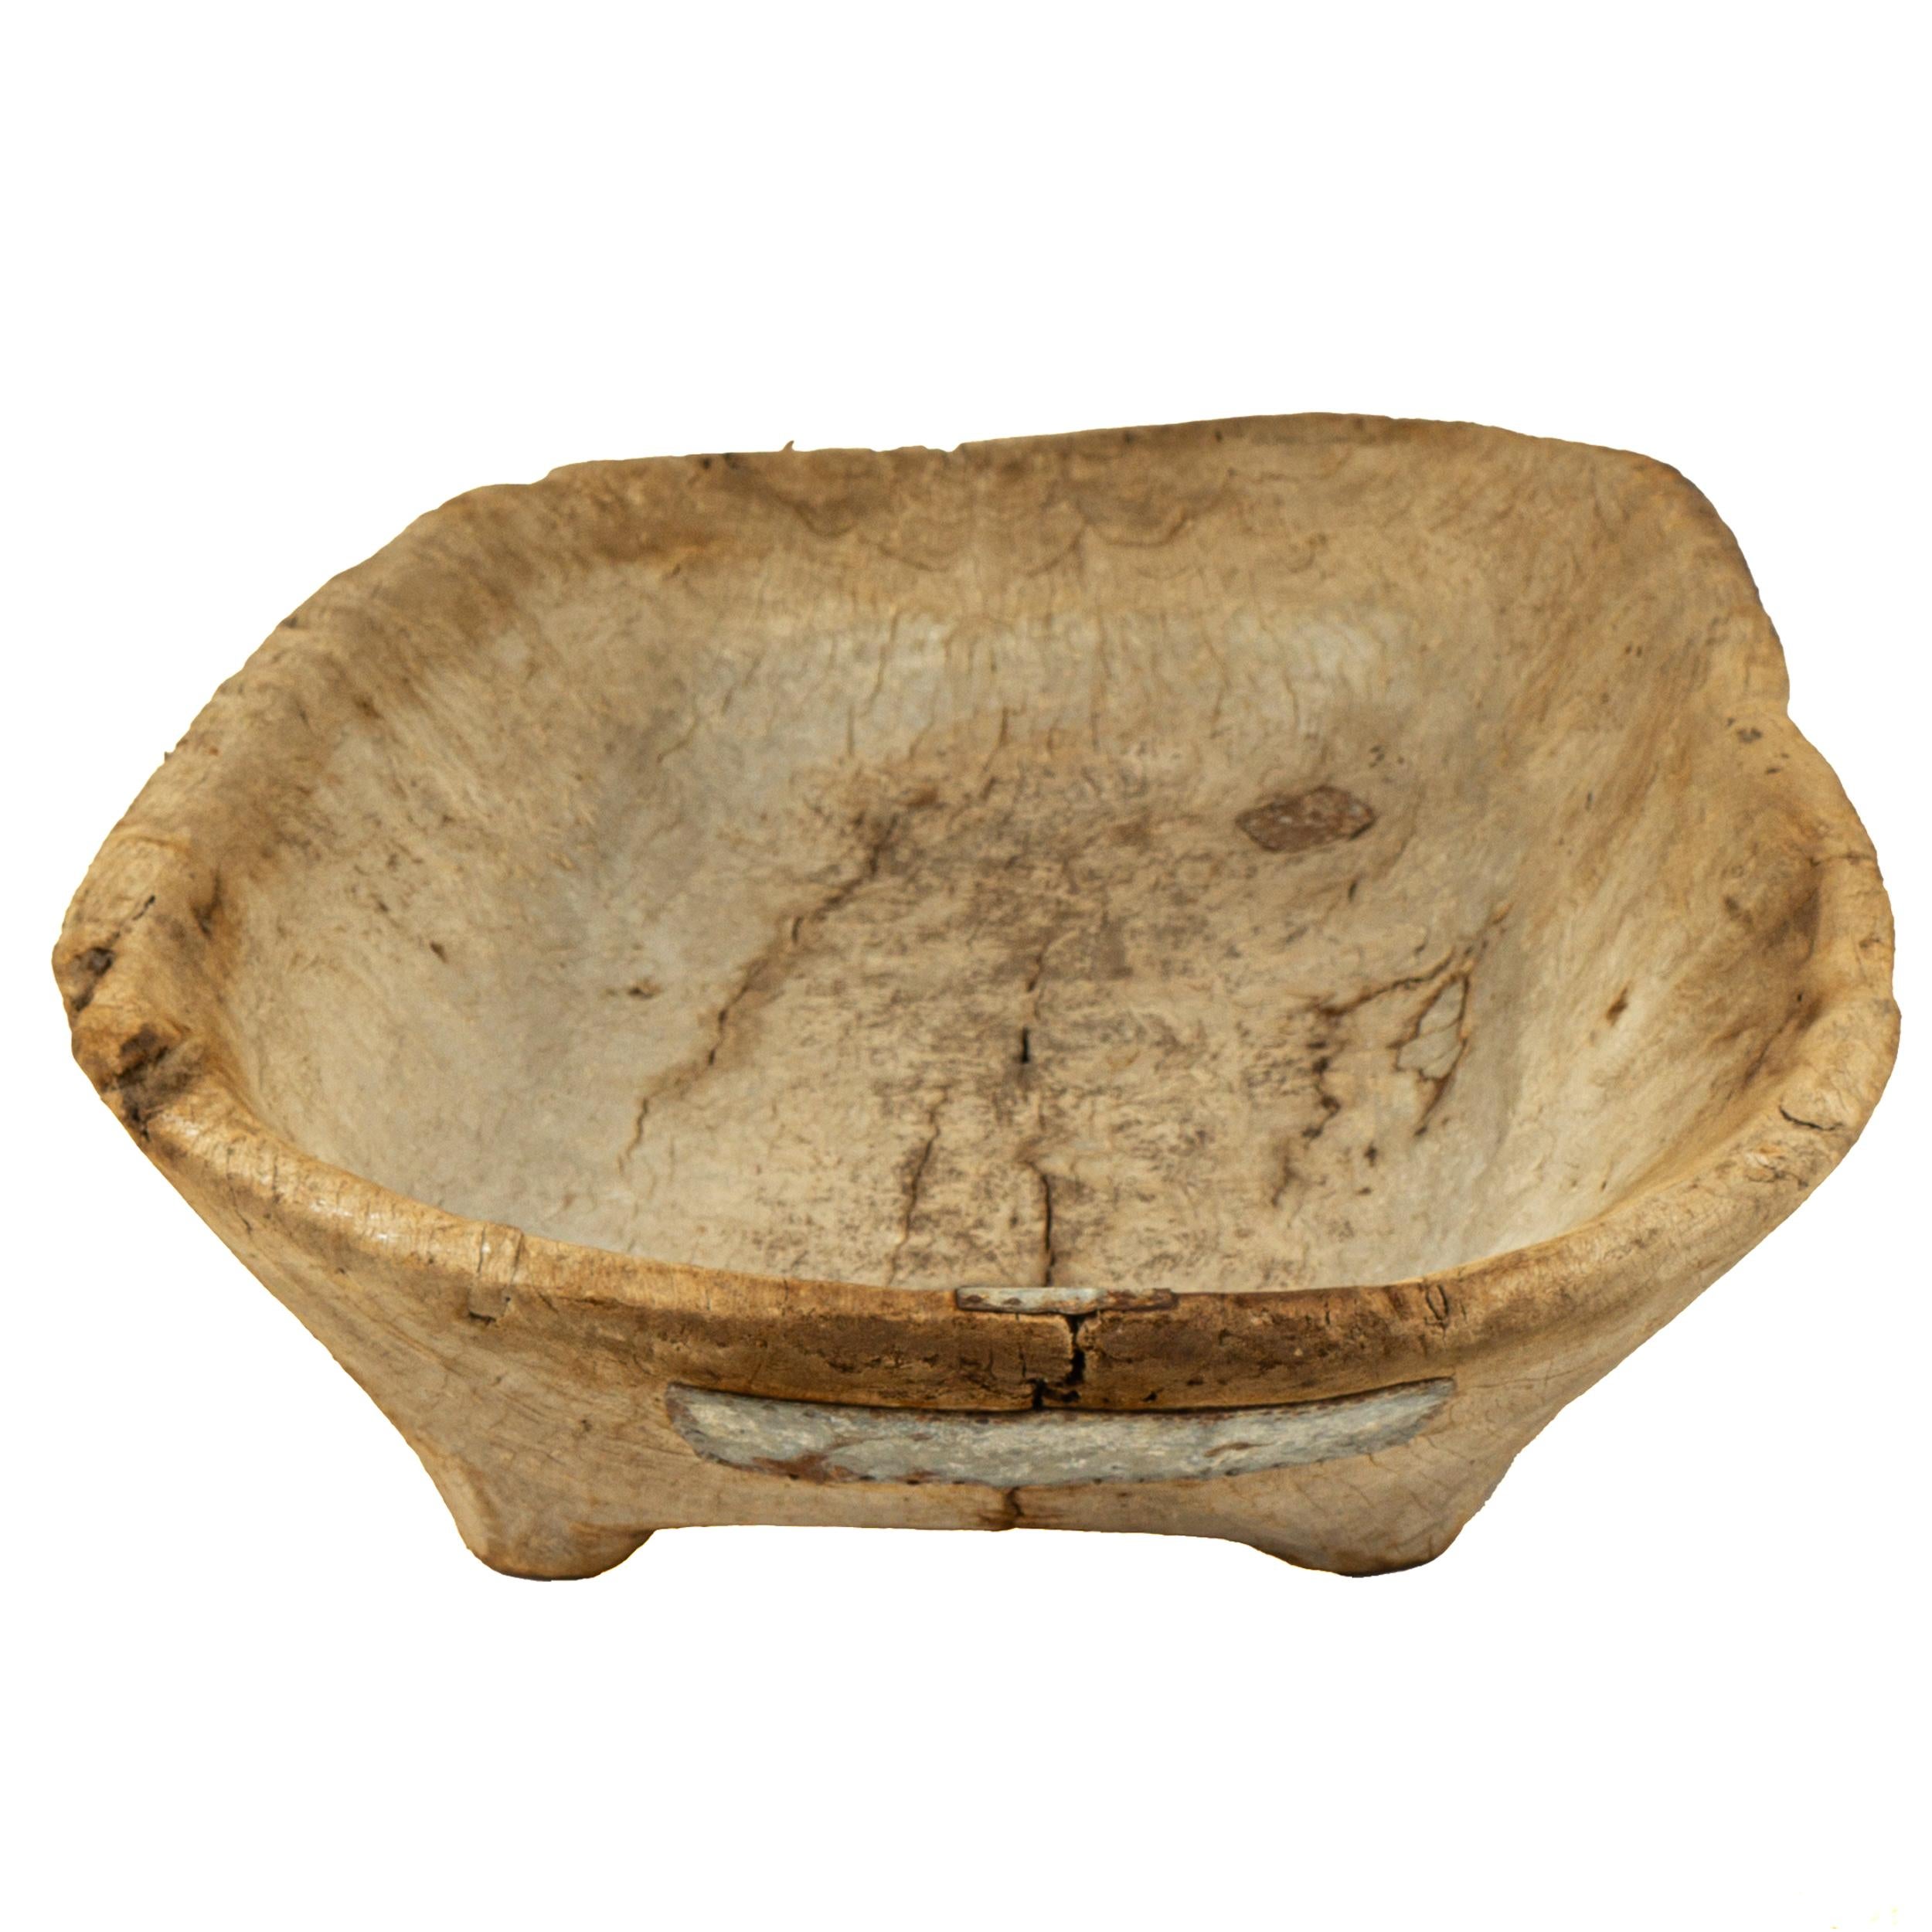 Primitive Remarkable Mesquite Wood Trough Bowl Found in Jalisco, Western Mexico, Mid 19th  For Sale